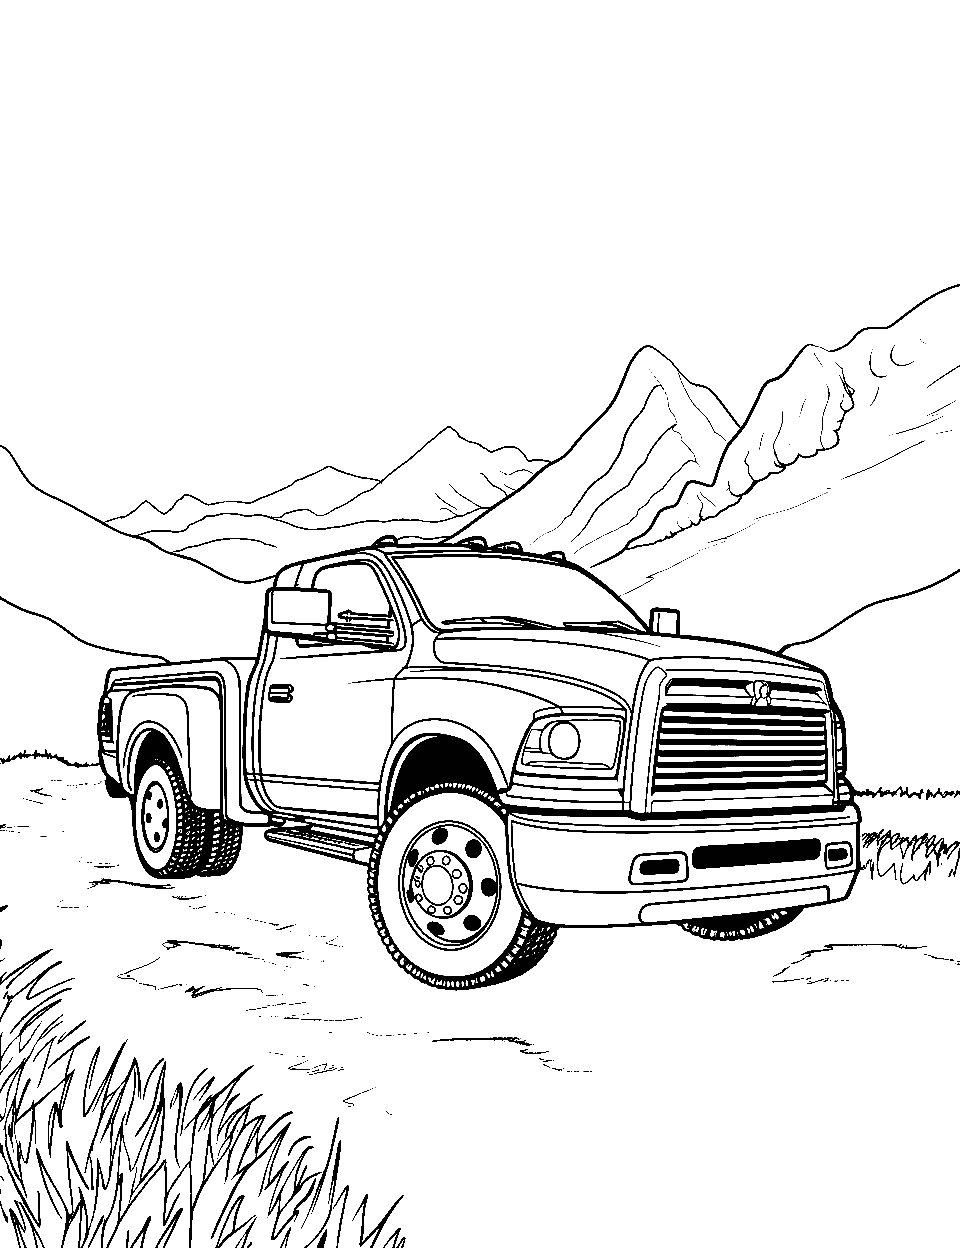 Dodge Ram at Sunrise Coloring Page - A Dodge Ram truck parked near a mountain range.